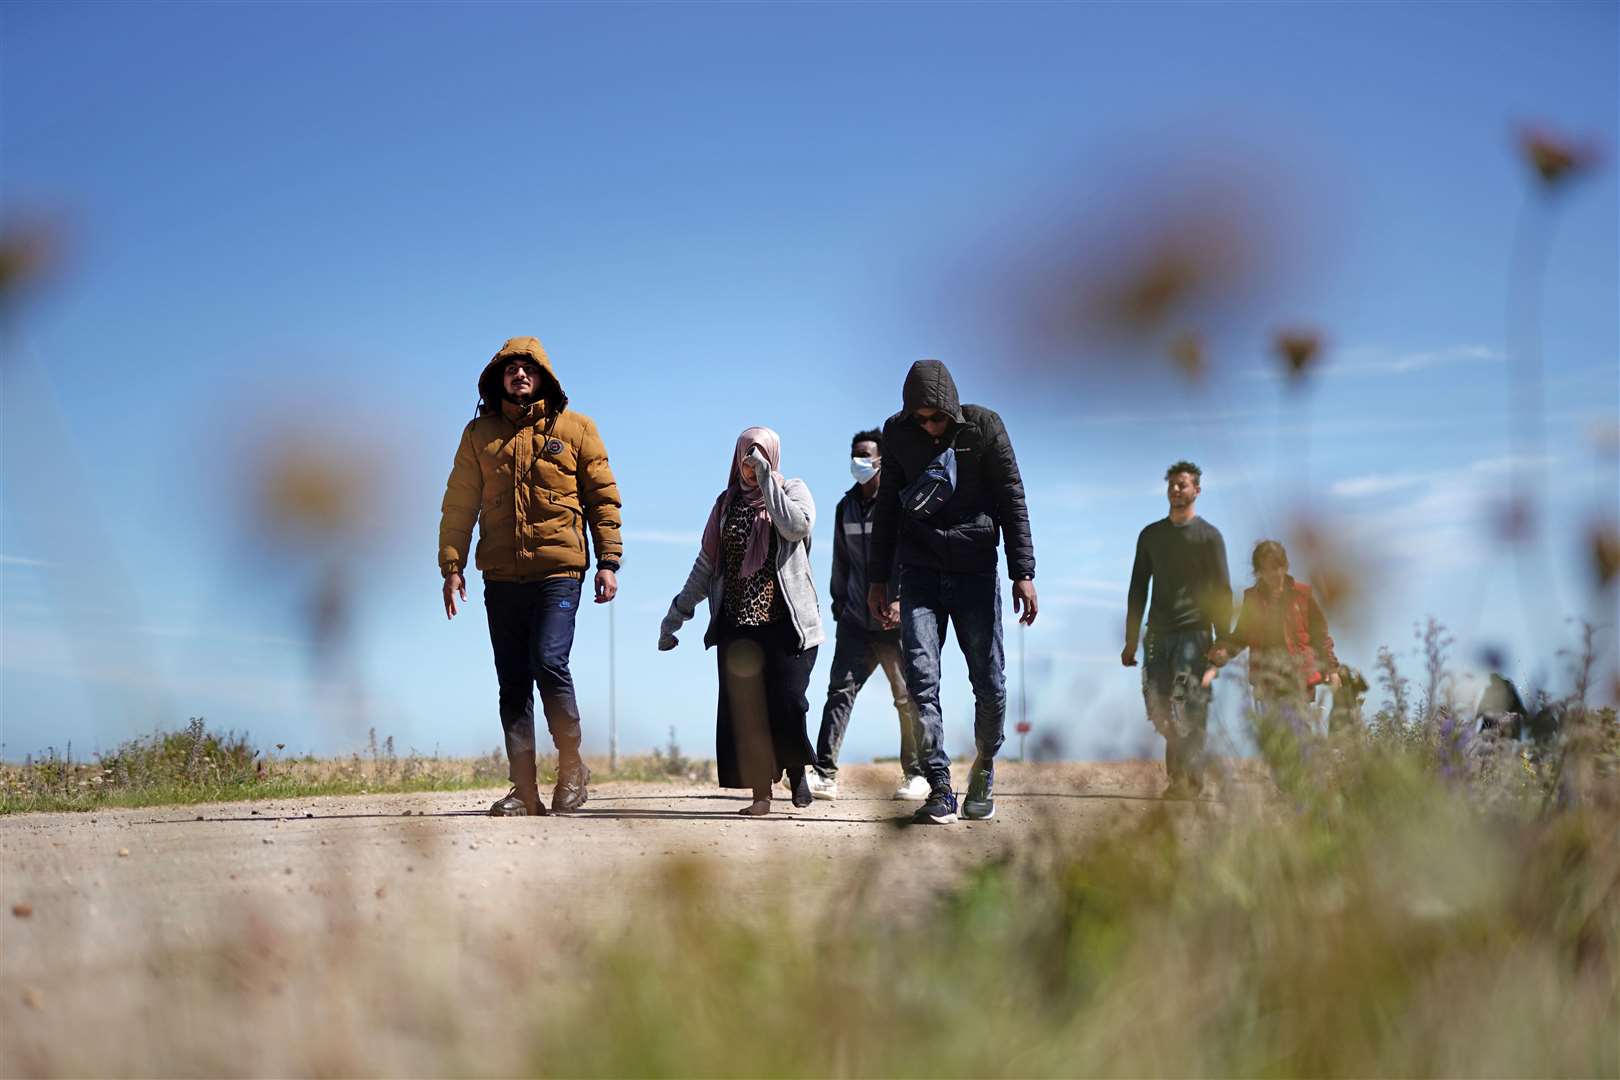 People thought to be migrants walking along the beach after being brought ashore in Dungeness, Kent, on Wednesday (Jordan Pettitt/PA)